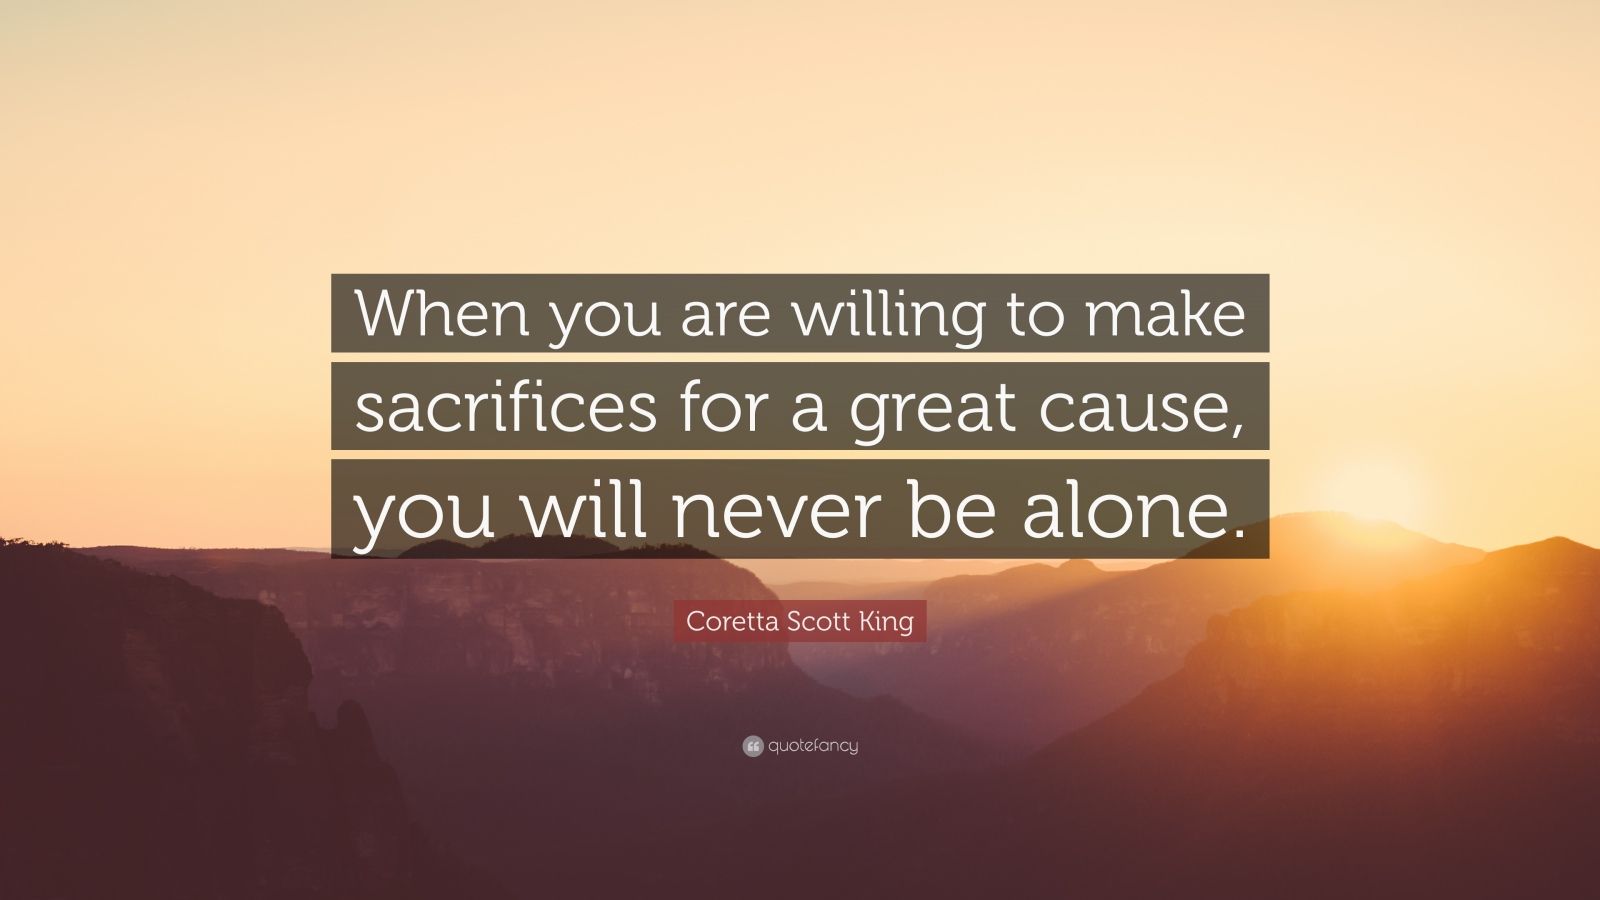 Coretta Scott King Quote: “When you are willing to make sacrifices for ...